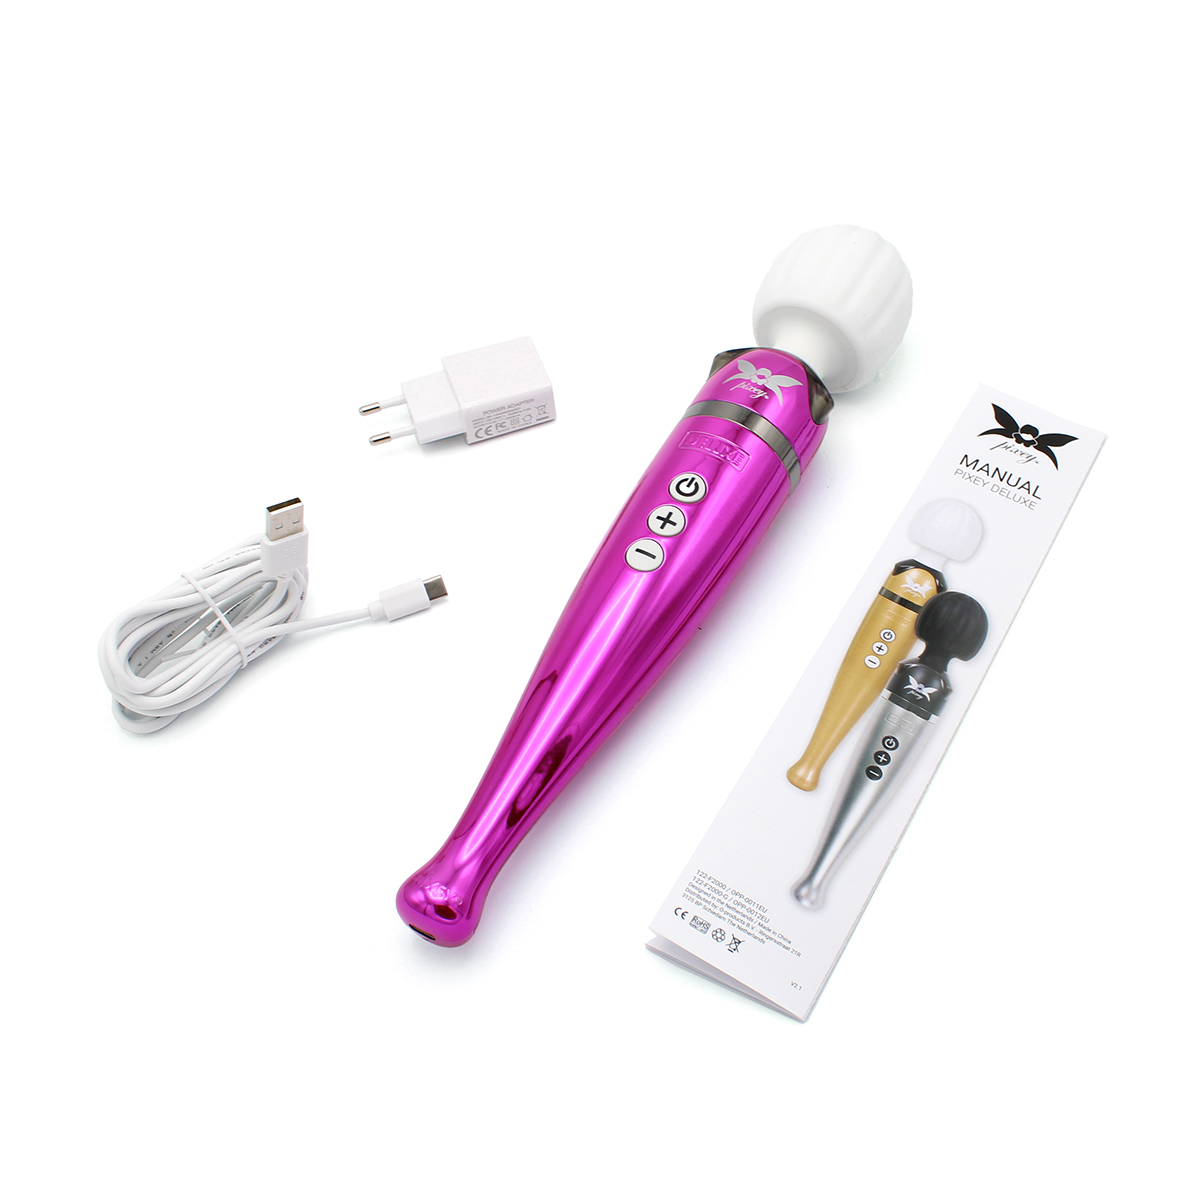 Pixey Deluxe Wand Massager pink chrome